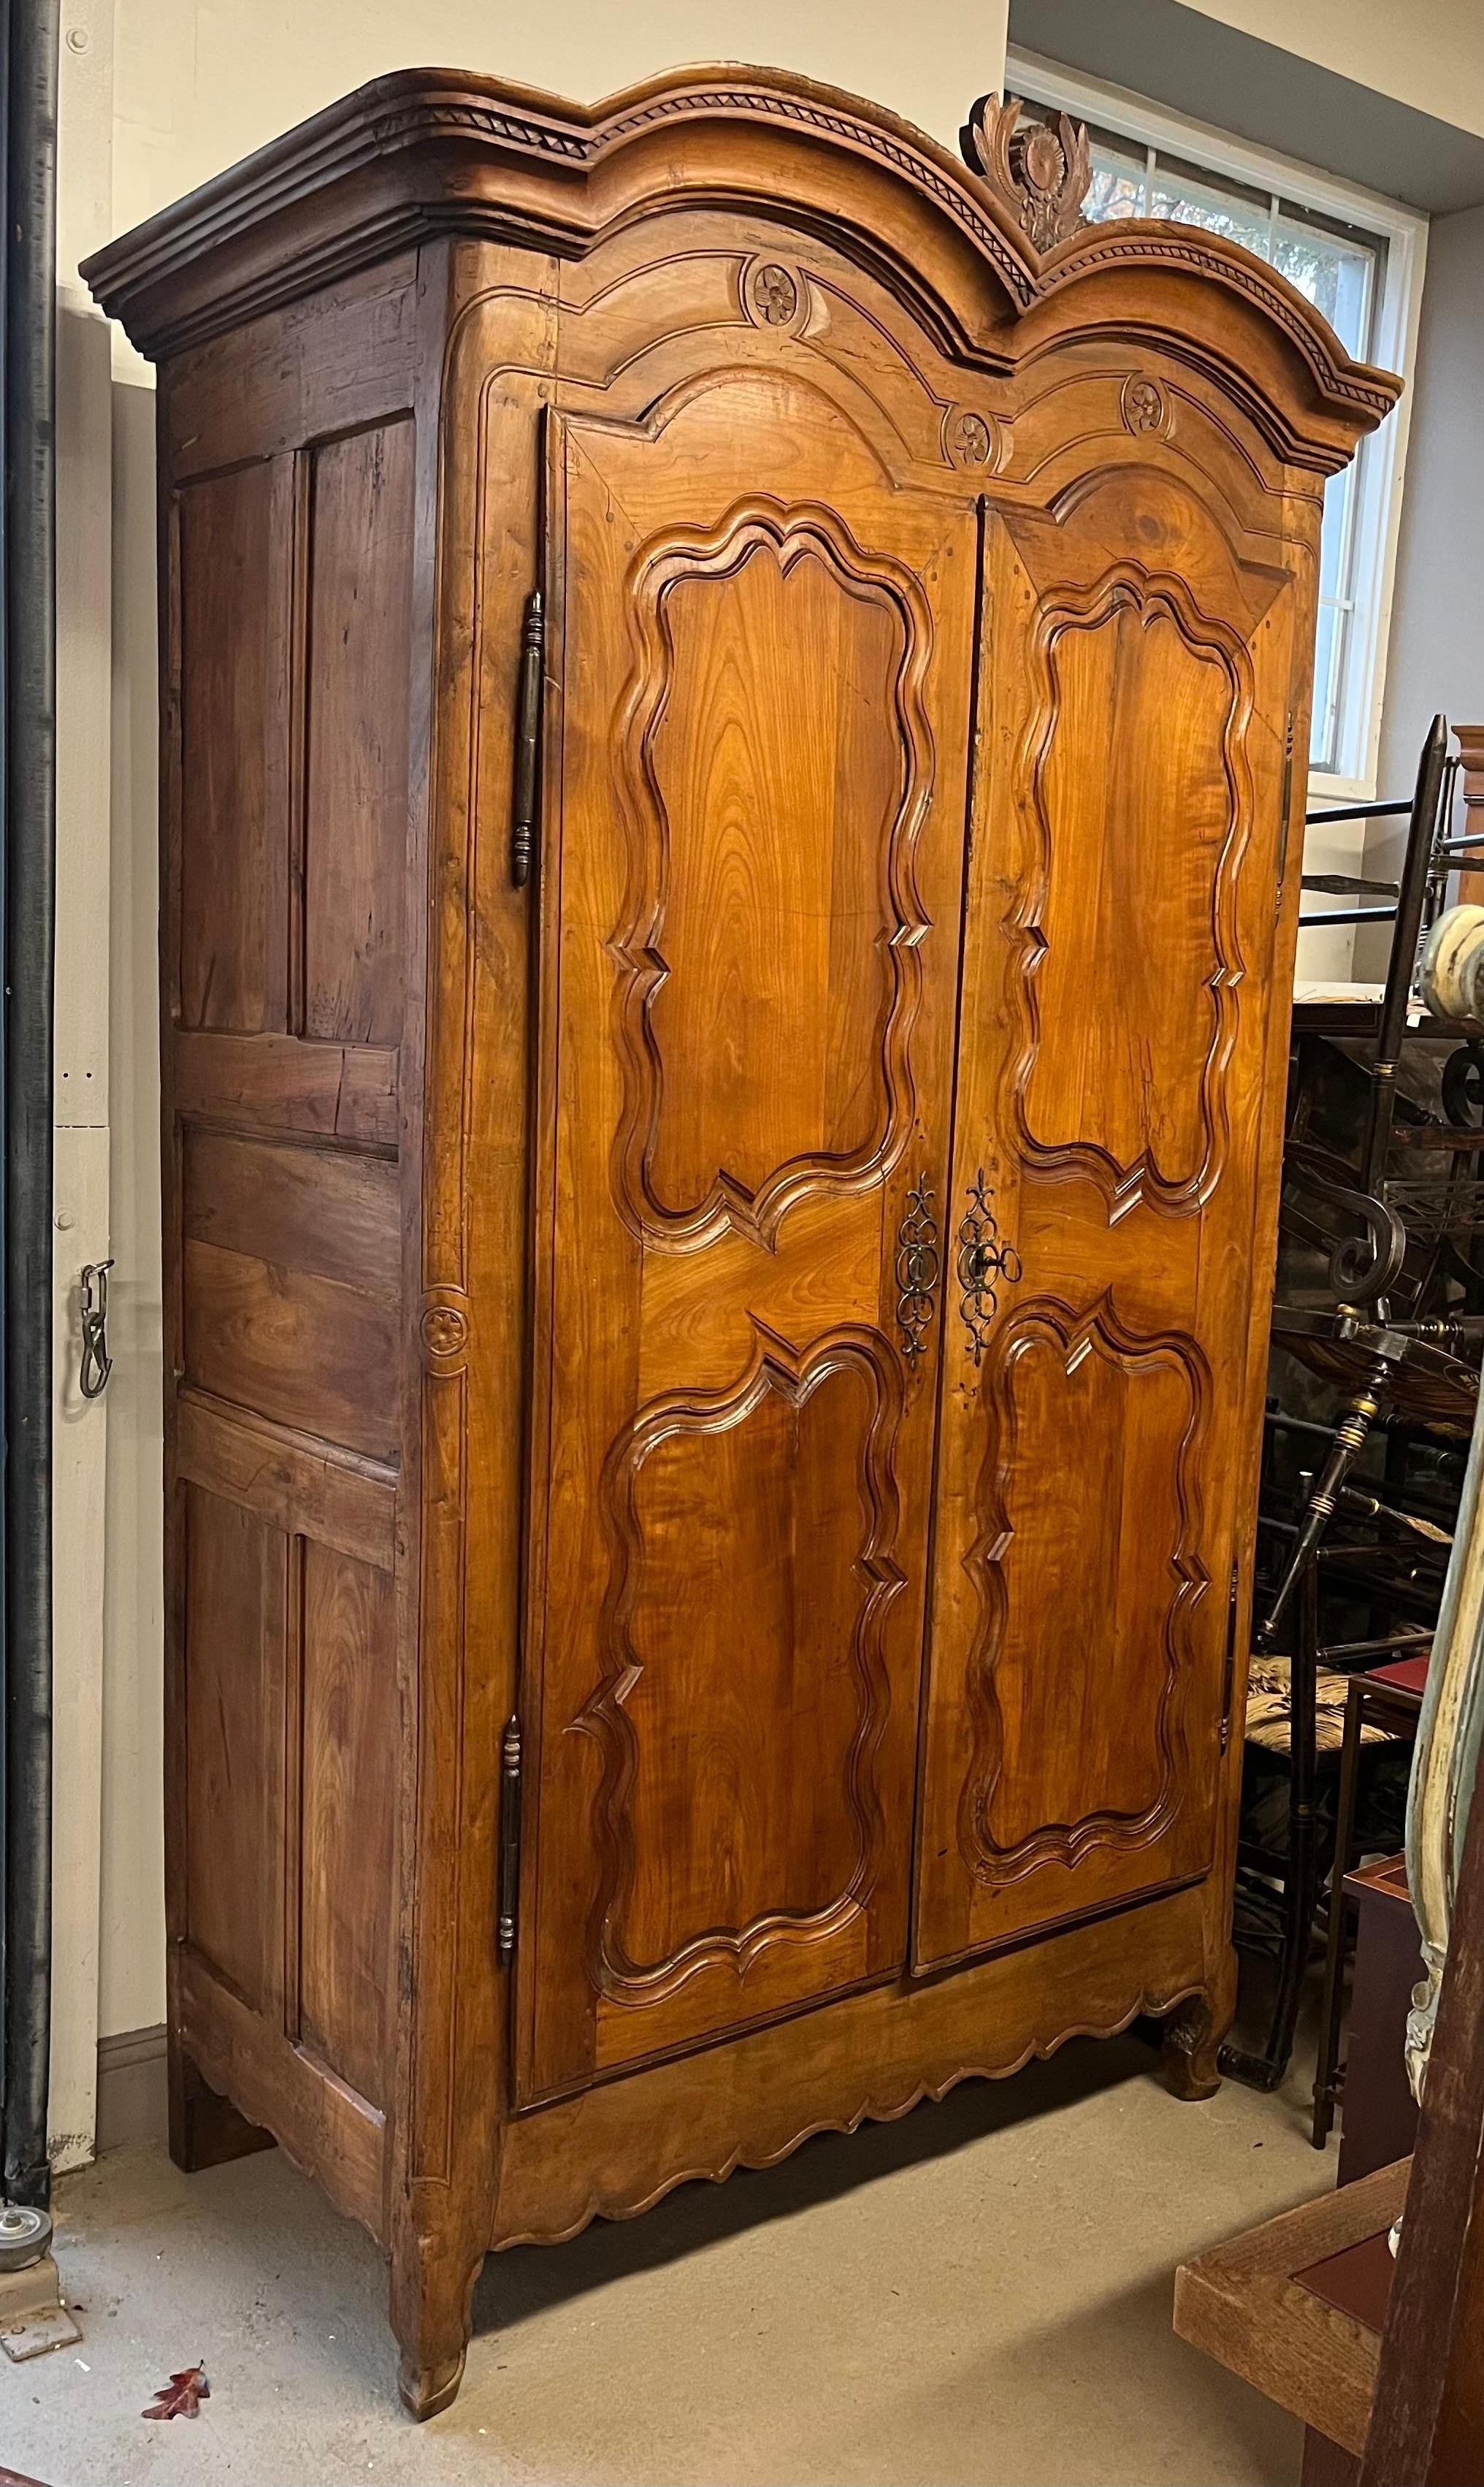 French Provincial French Country Armoire In Cherry, C. 1790 For Sale